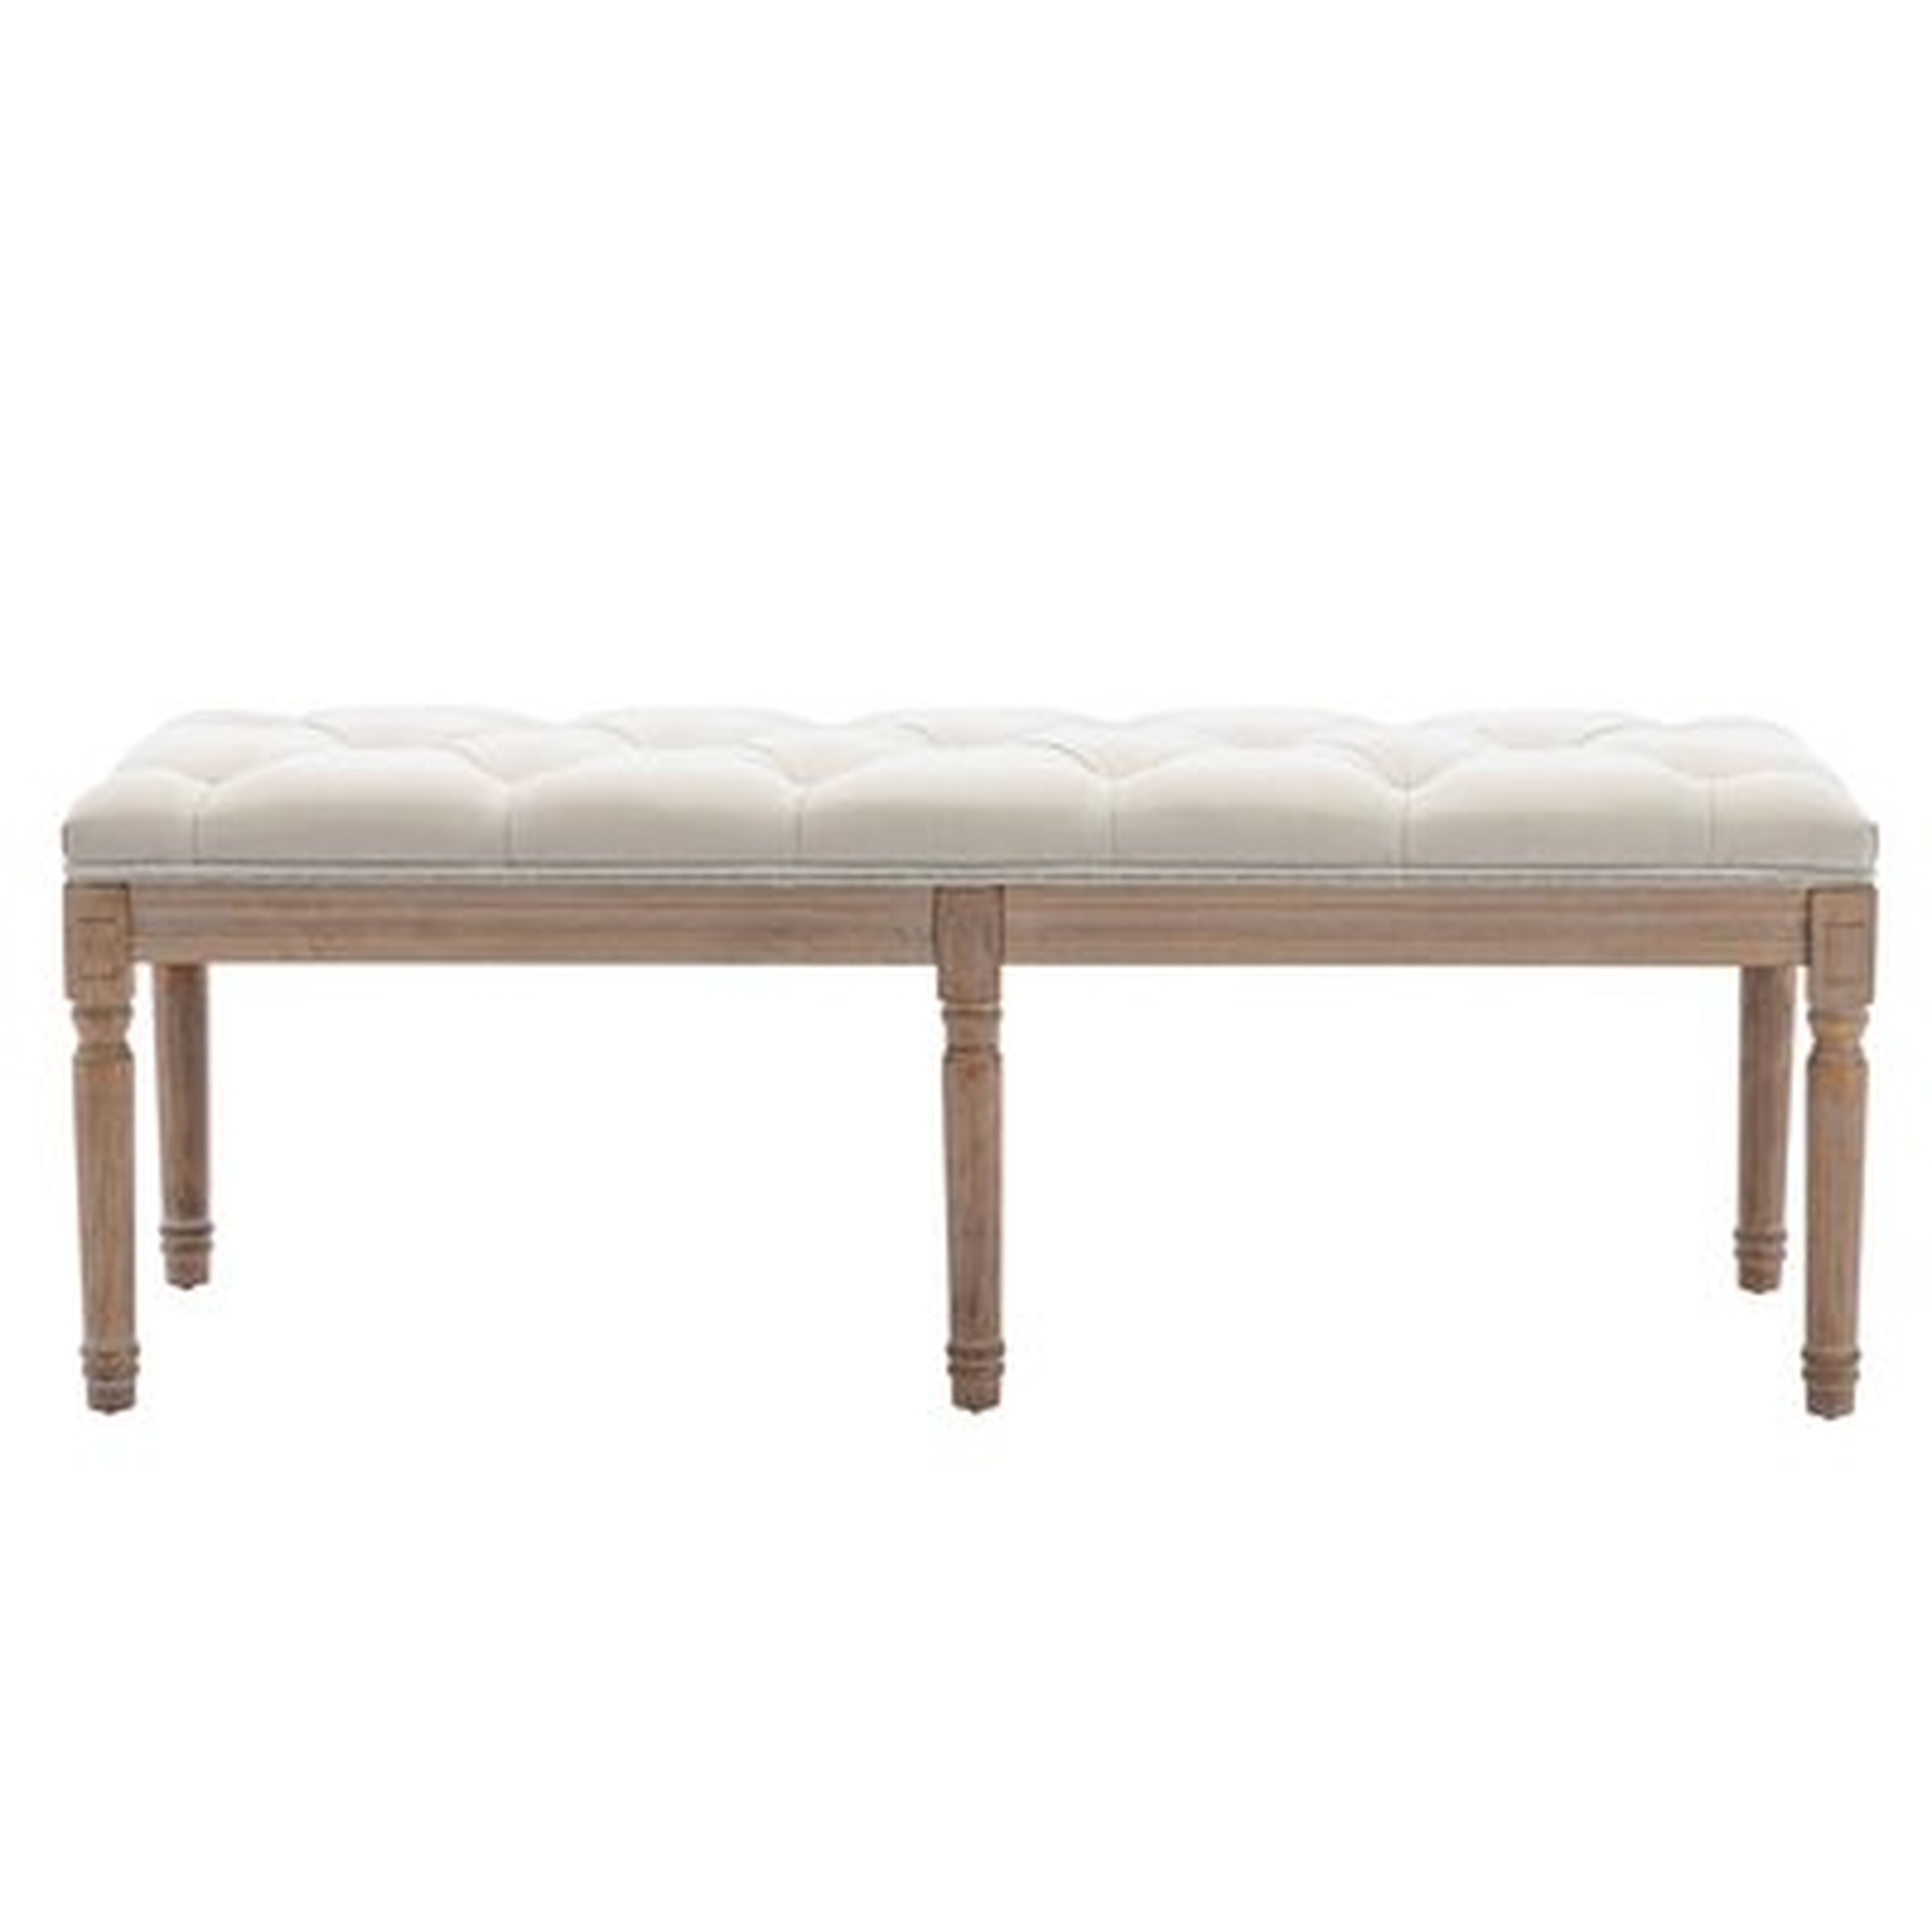 End Of Bed Bench Upholstered Entryway Bench French Benchwith Rubberwood Legs For Bedroom/entry/hallway - Wayfair